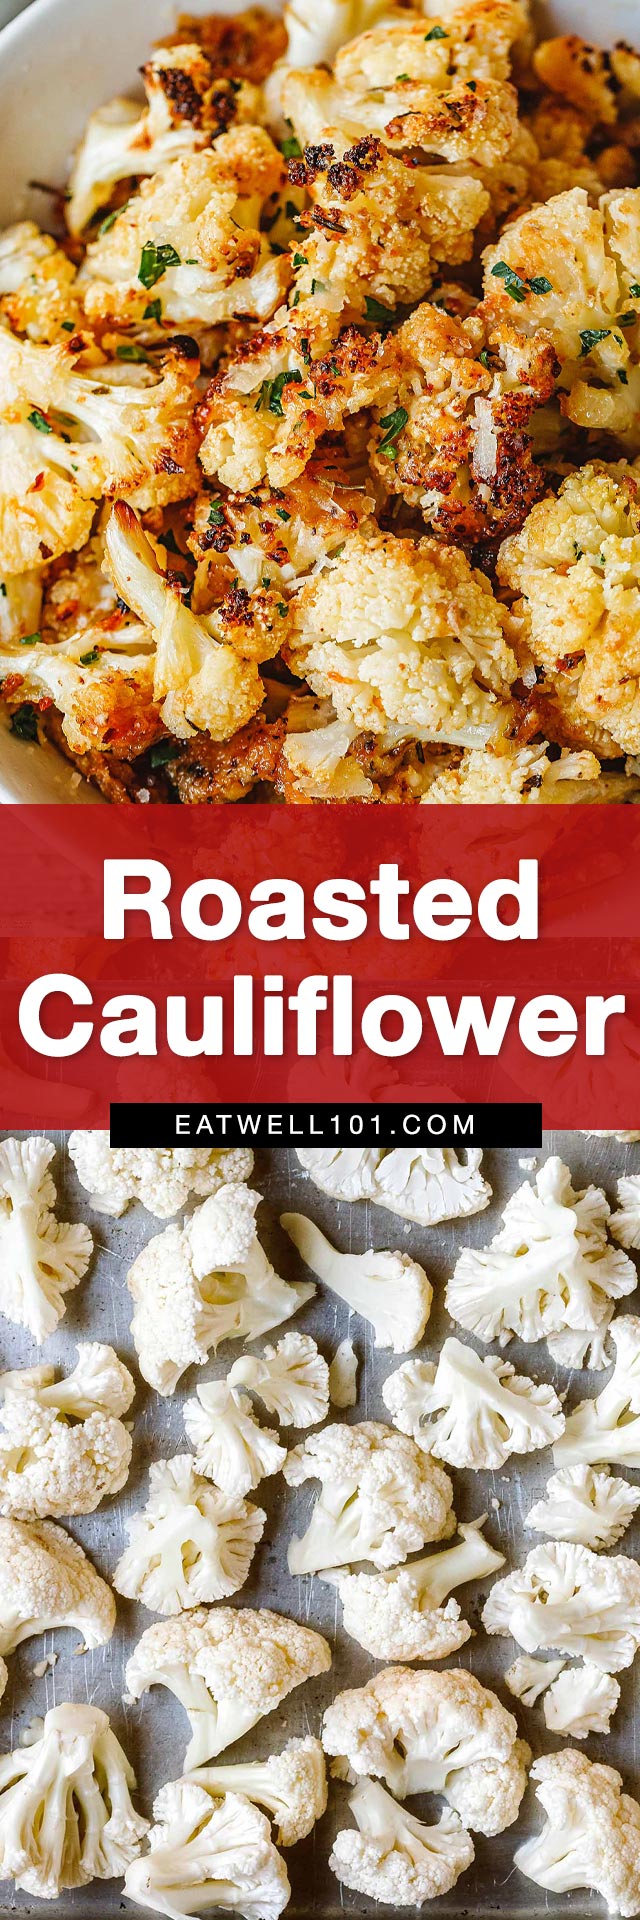 Garlic Parmesan Roasted Cauliflower - #roasted #cauliflower #recipe #eatwell101 -  delicious side dish with garlic, olive oil and parmesan cheese to add a tasty veggie touch to your dinner menu!